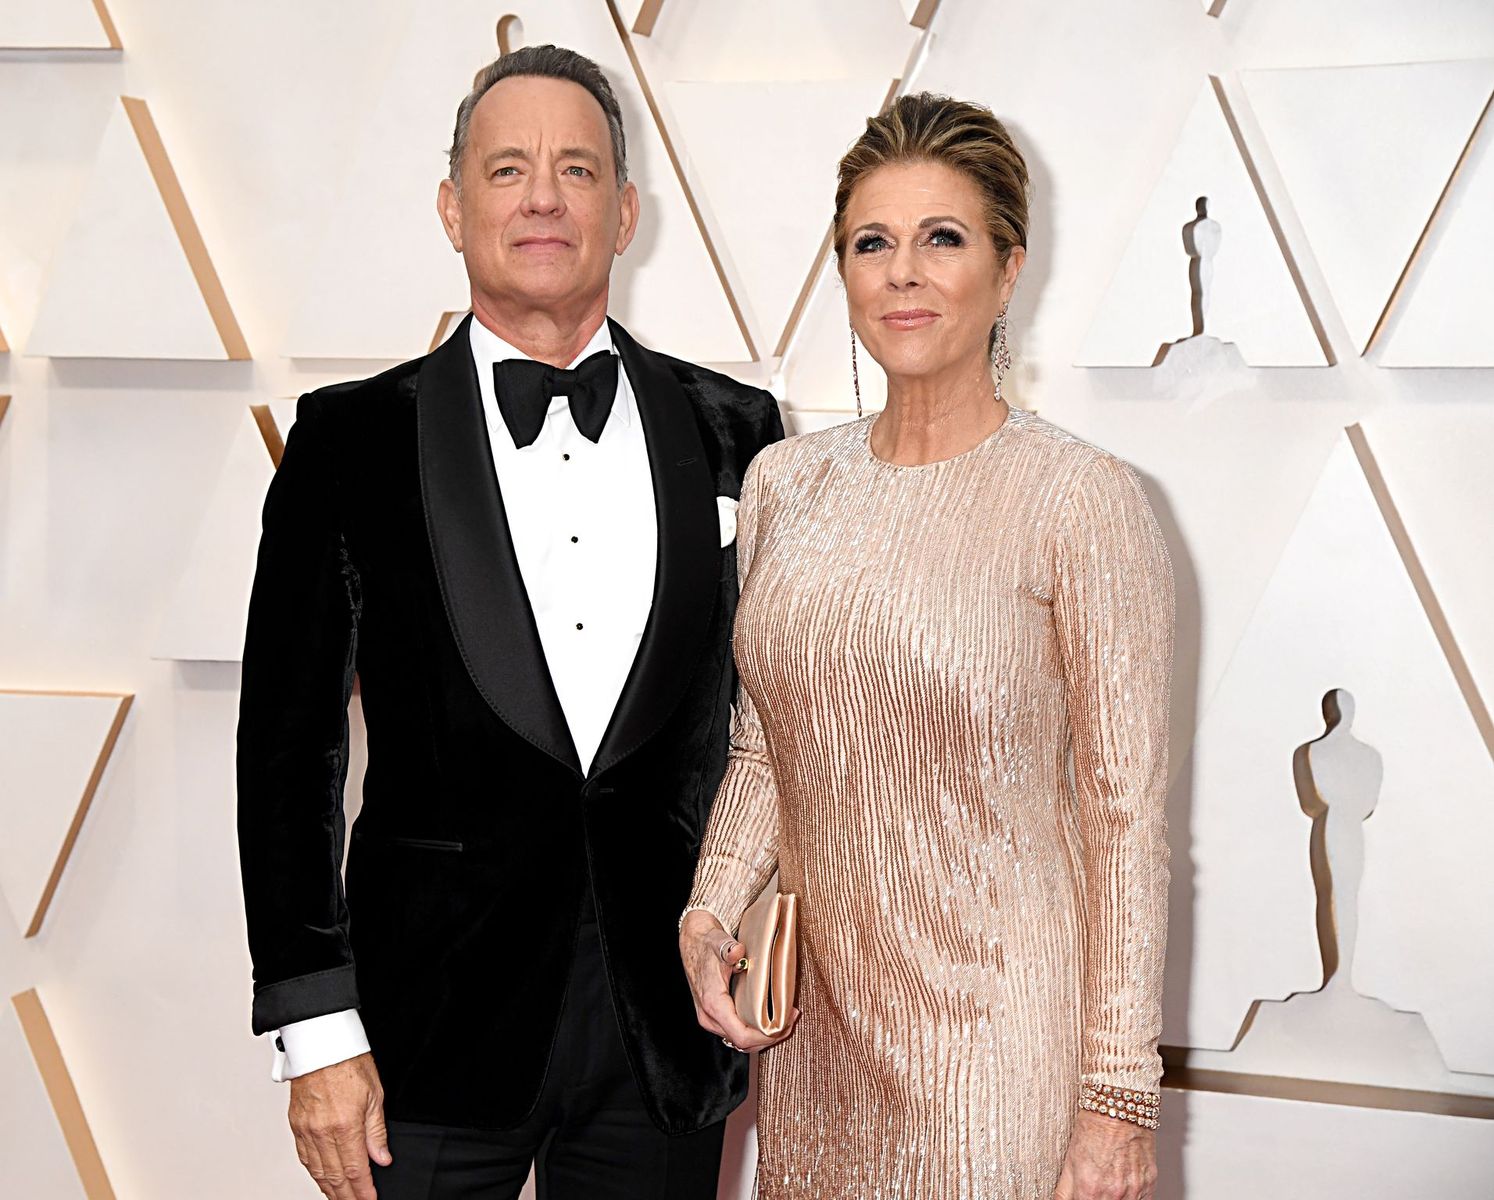 Tom Hanks and Rita Wilson at the 92nd Annual Academy Awards on February 09, 2020, in Hollywood, California | Photo: Jeff Kravitz/FilmMagic/Getty Images